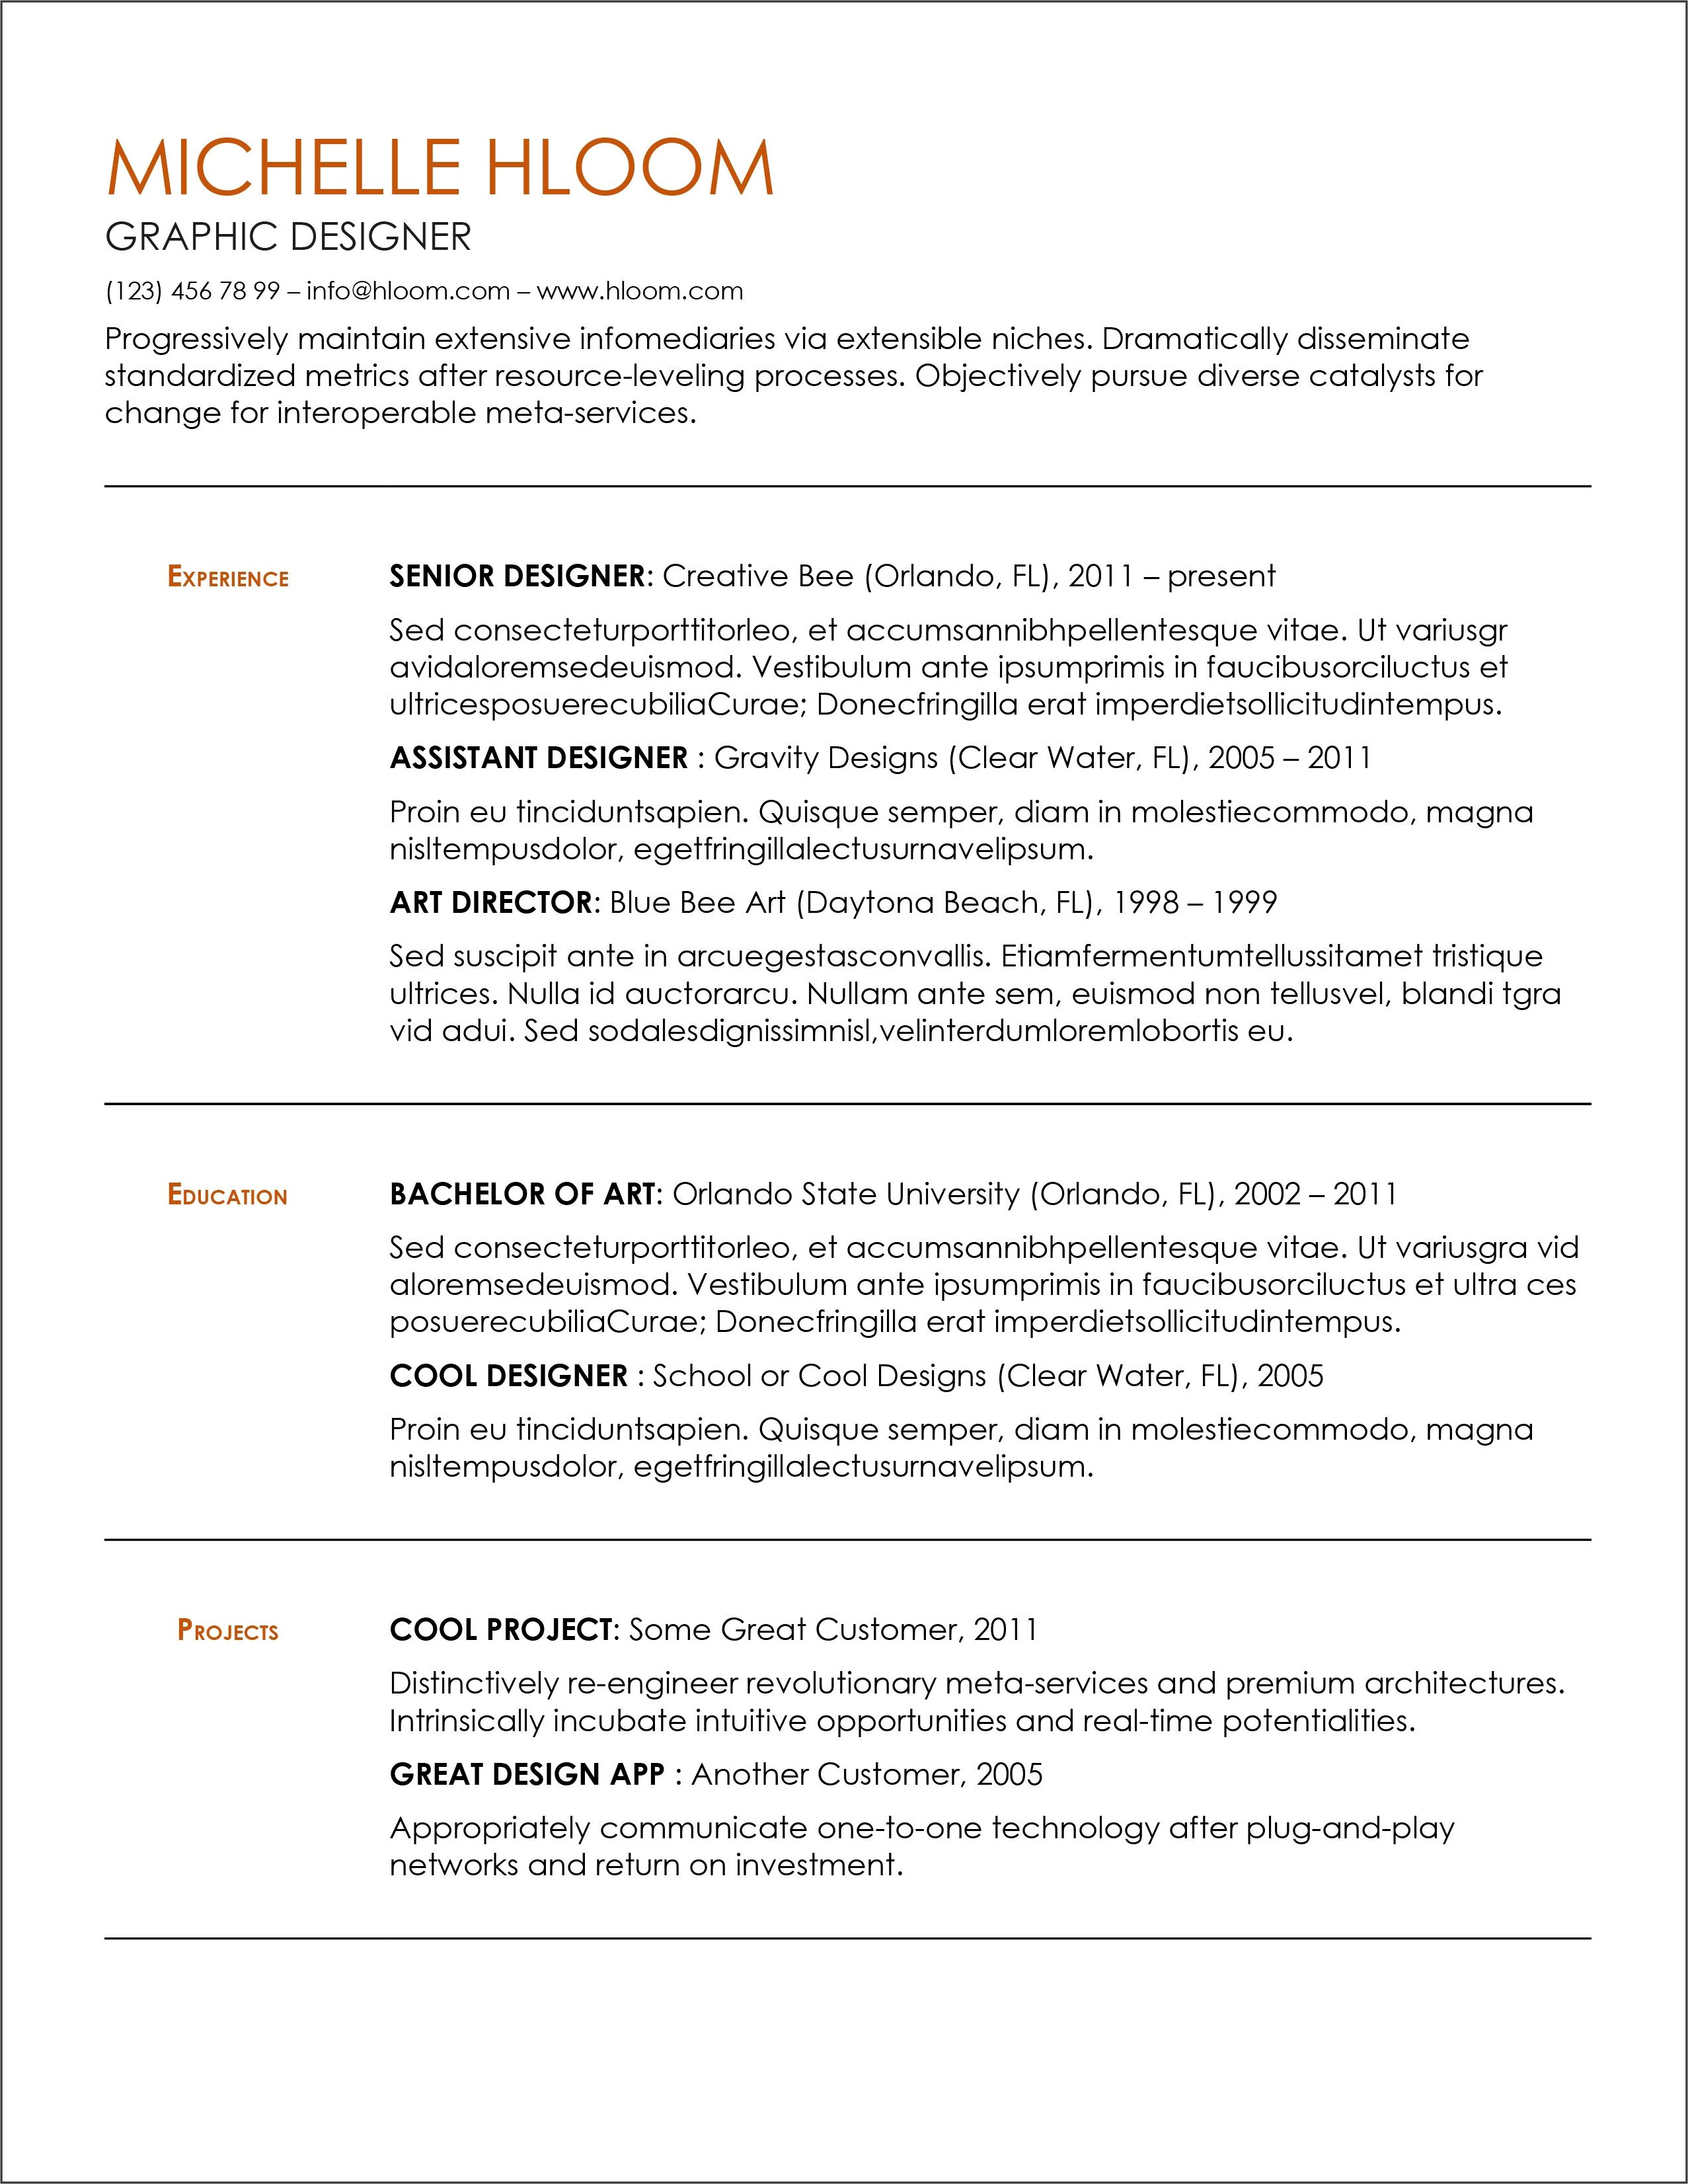 Download Free Resume Template Packed